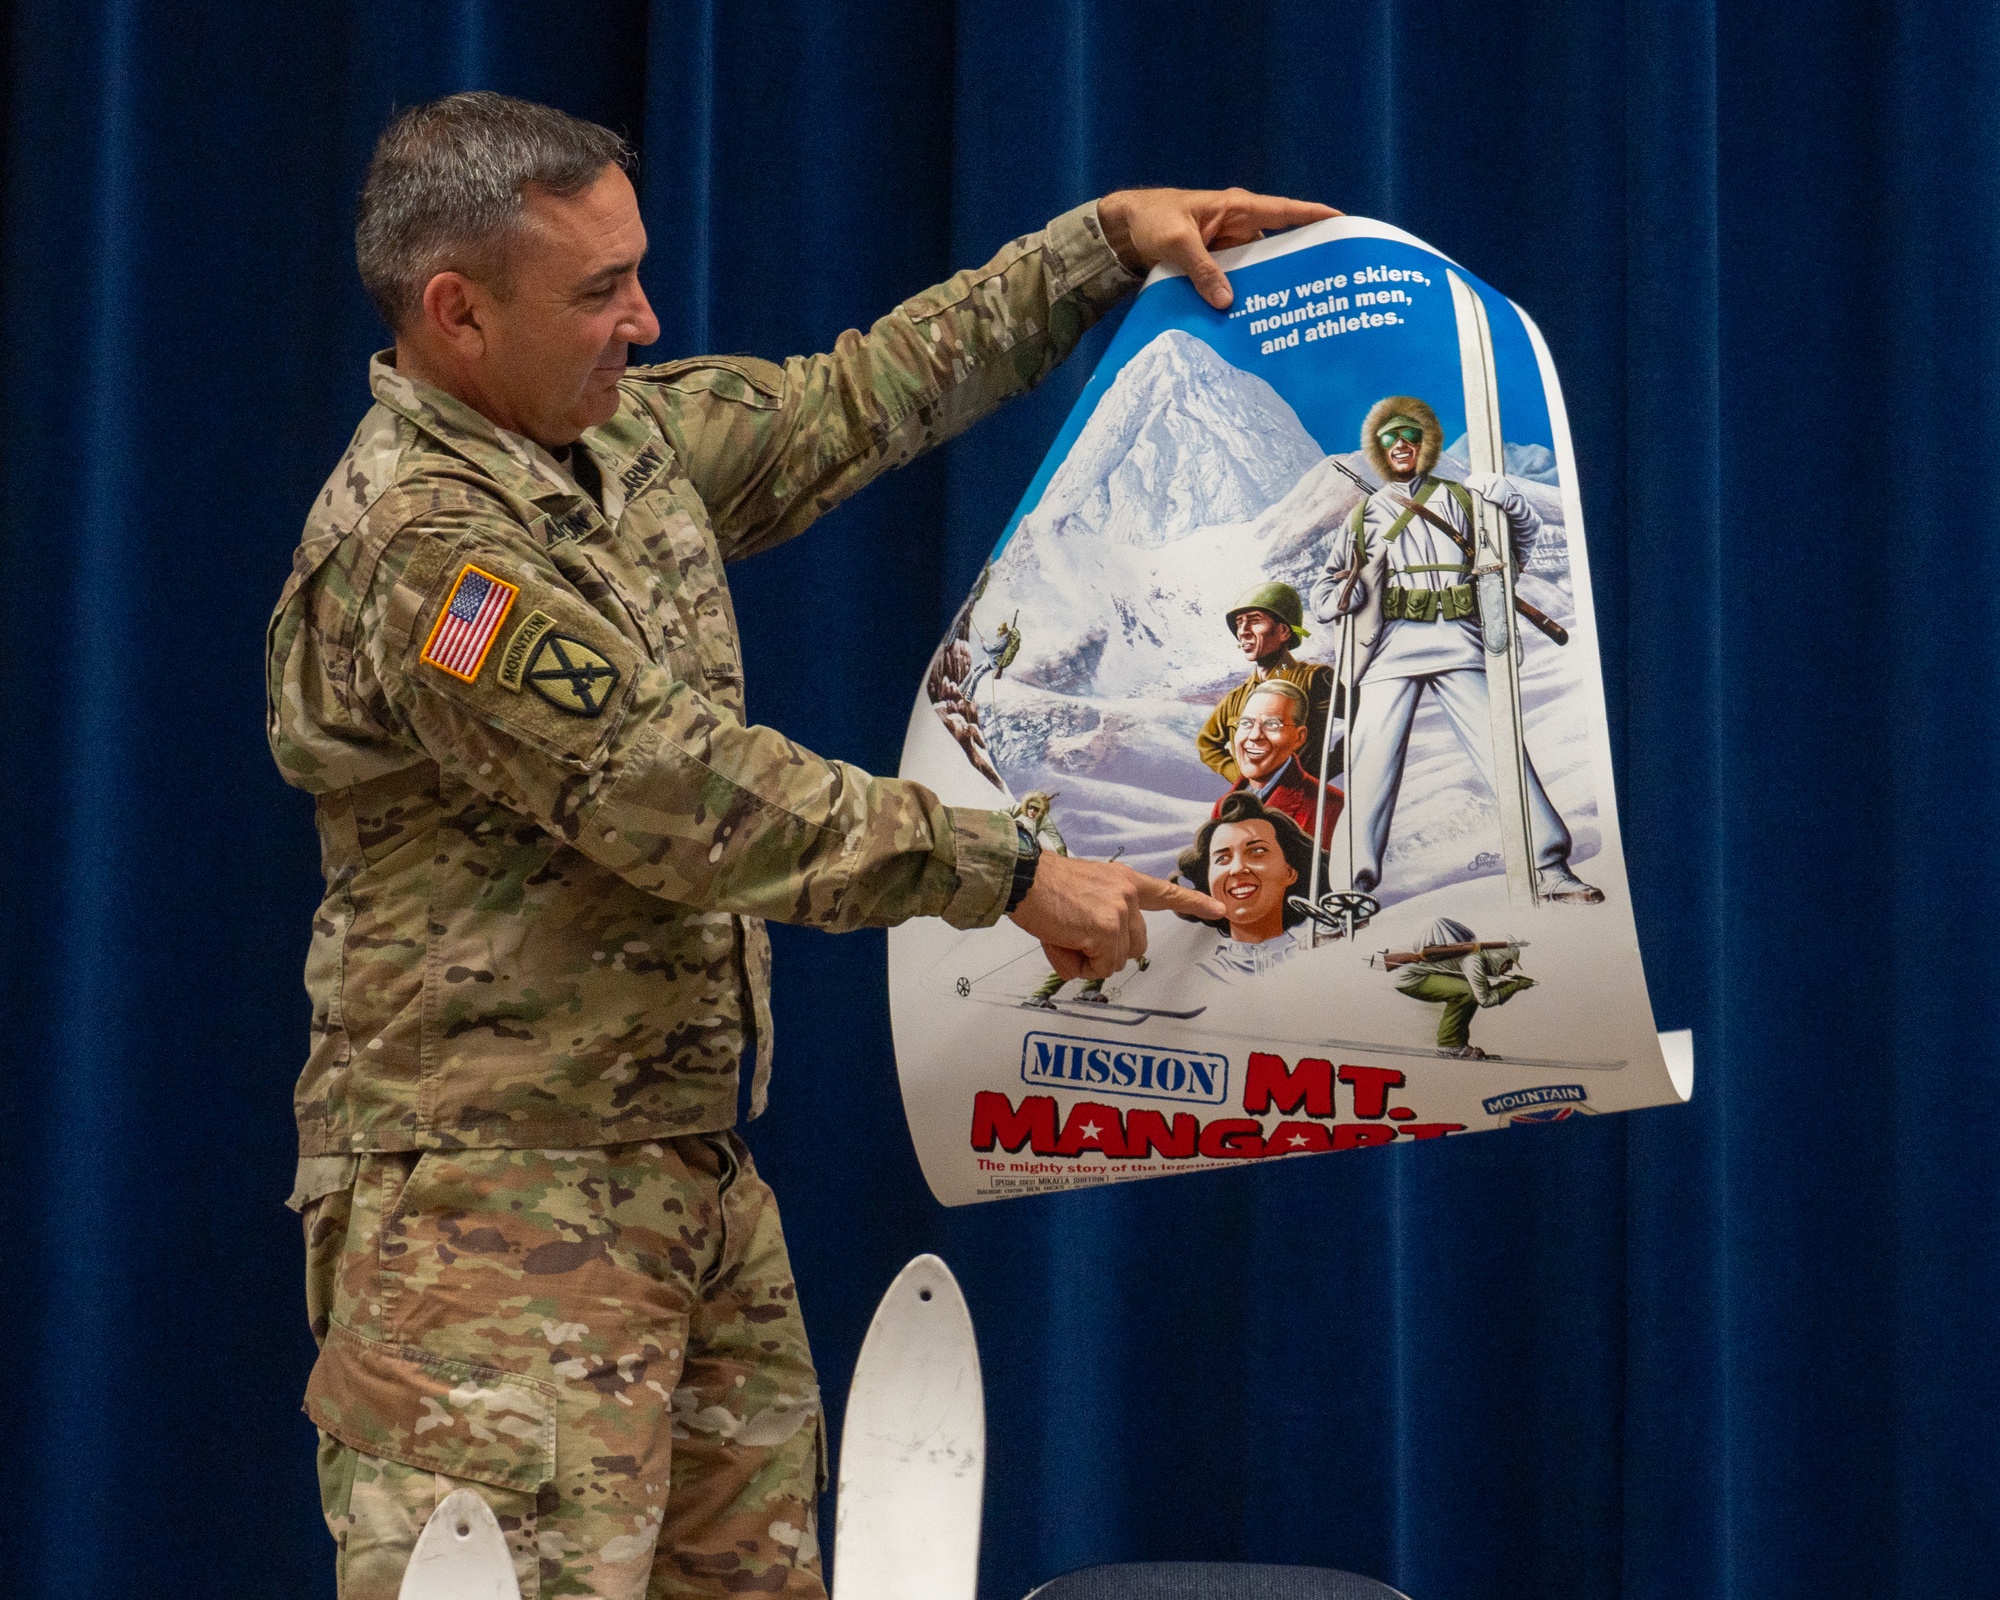 Mission Mt. Mangart' creators unveil classic film poster featuring 10th  Mountain Division